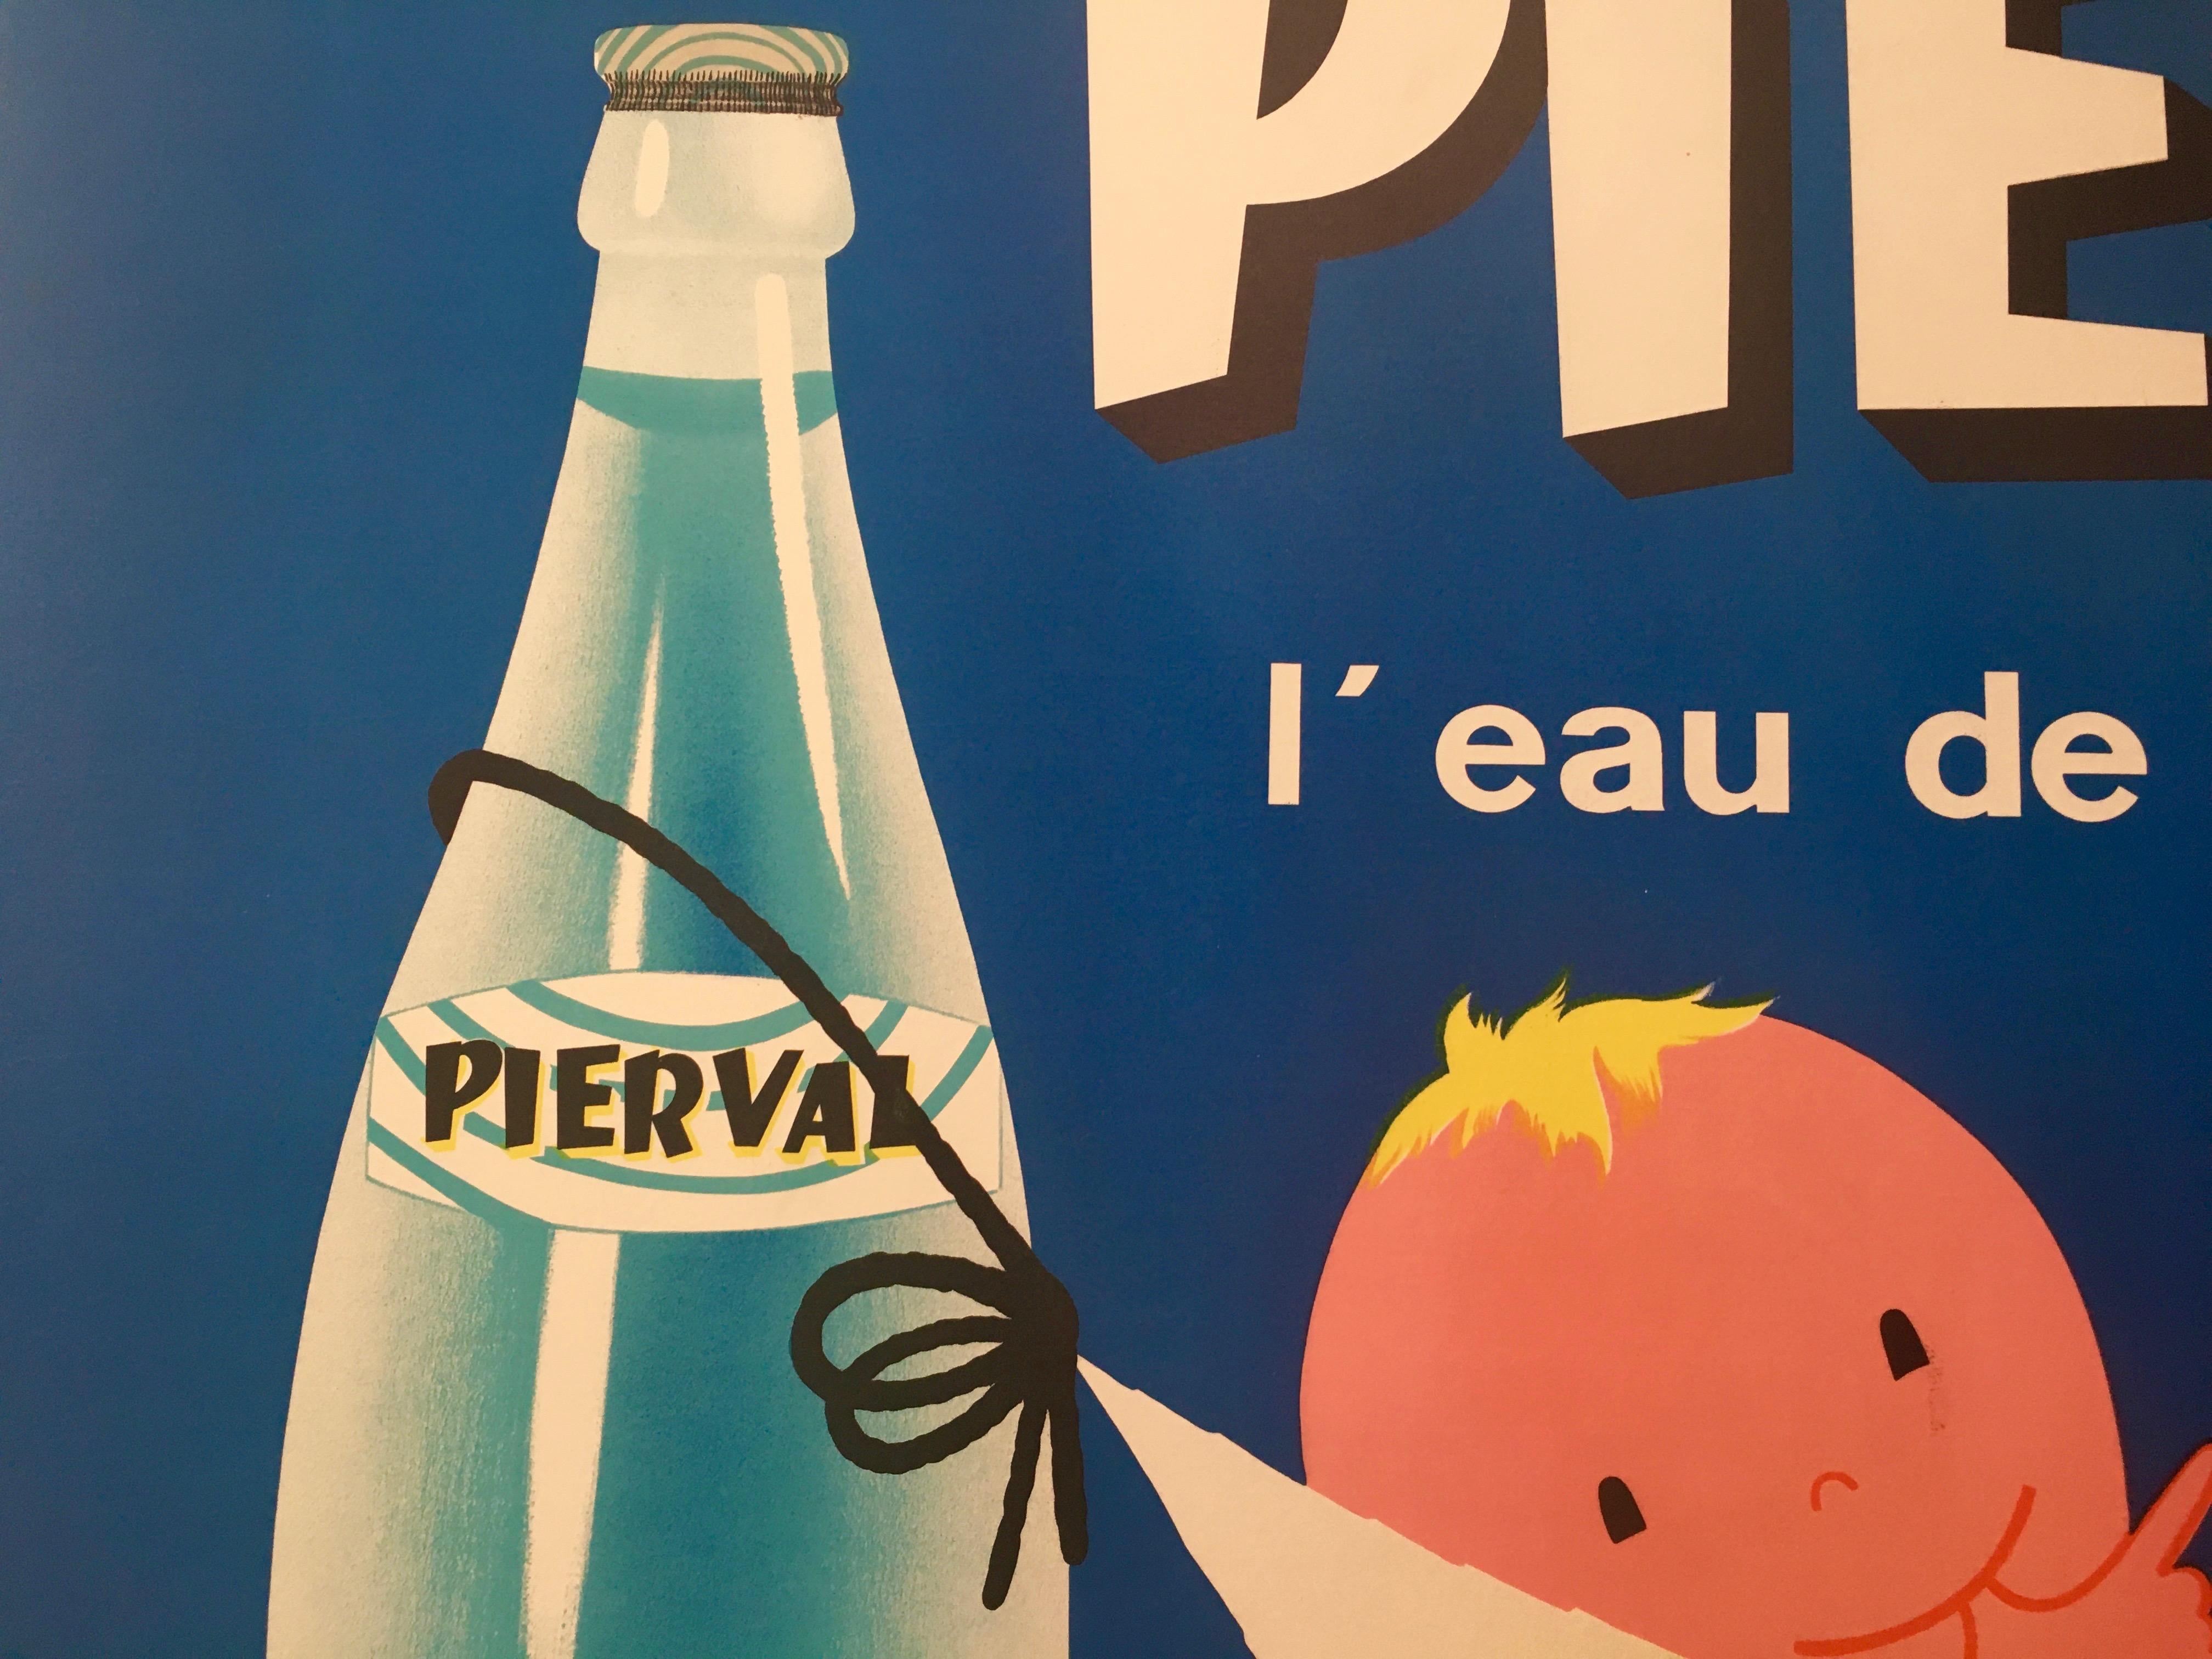 Mid-20th Century French Mineral Water Original Vintage Advertising Poster, 'Pierval' by J. Auriac